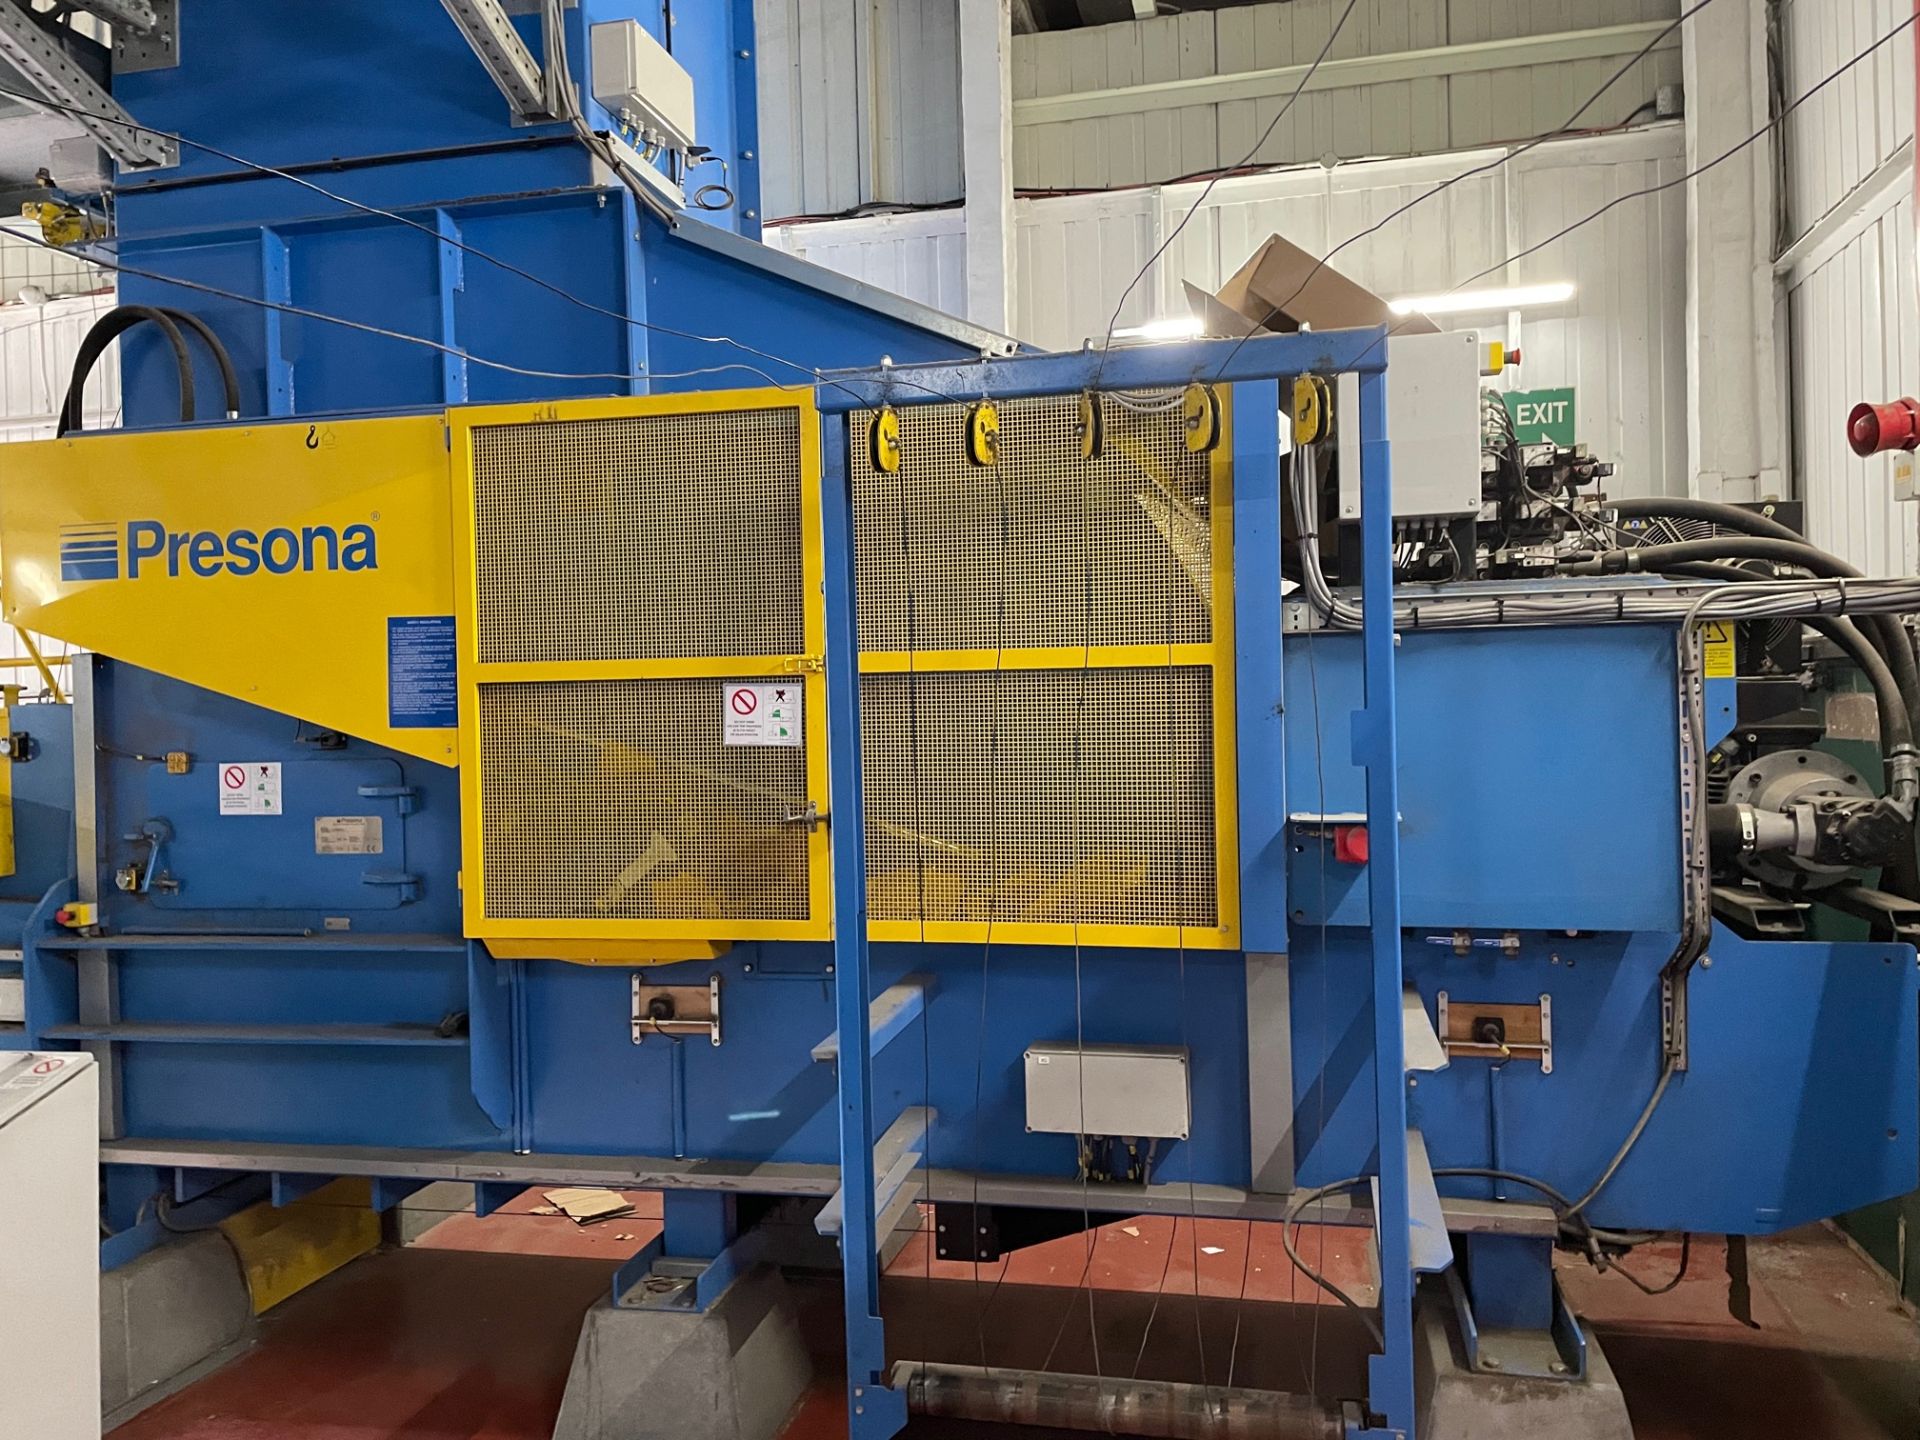 Presona LP 50 VH1 cardboard baler, Serial no. 5554, Year 2012 with 2 - inclined infeed conveyors, - Image 5 of 10